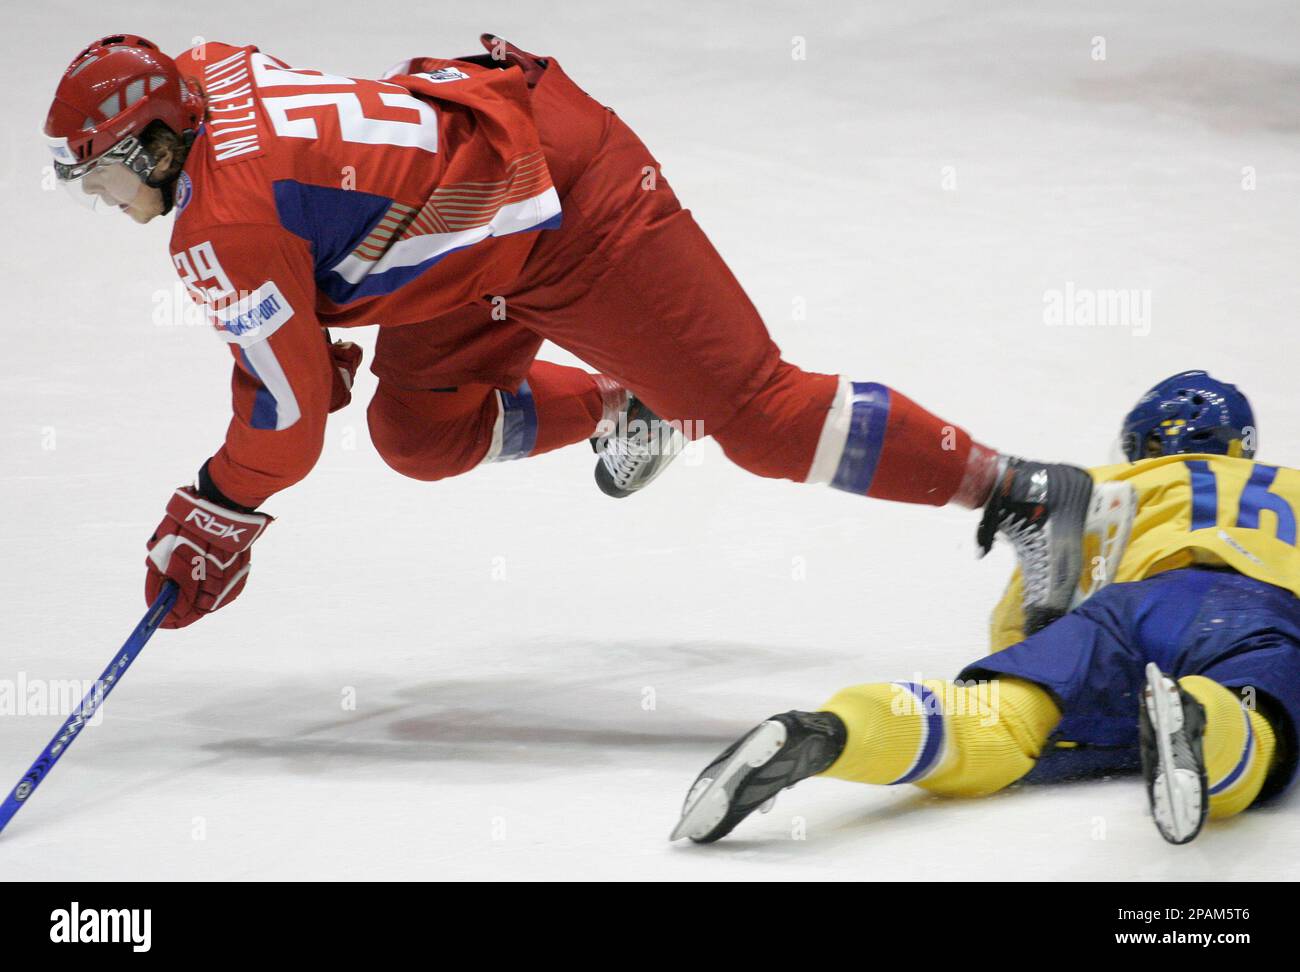 Mikhail Milekhin, left, from Russia trips over Tobias Forsberg, right, from Sweden during their IIHF World U20 Ice Hockey Championships semi-final match in Pardubice, some 130 kilometers (about 85 miles) east of